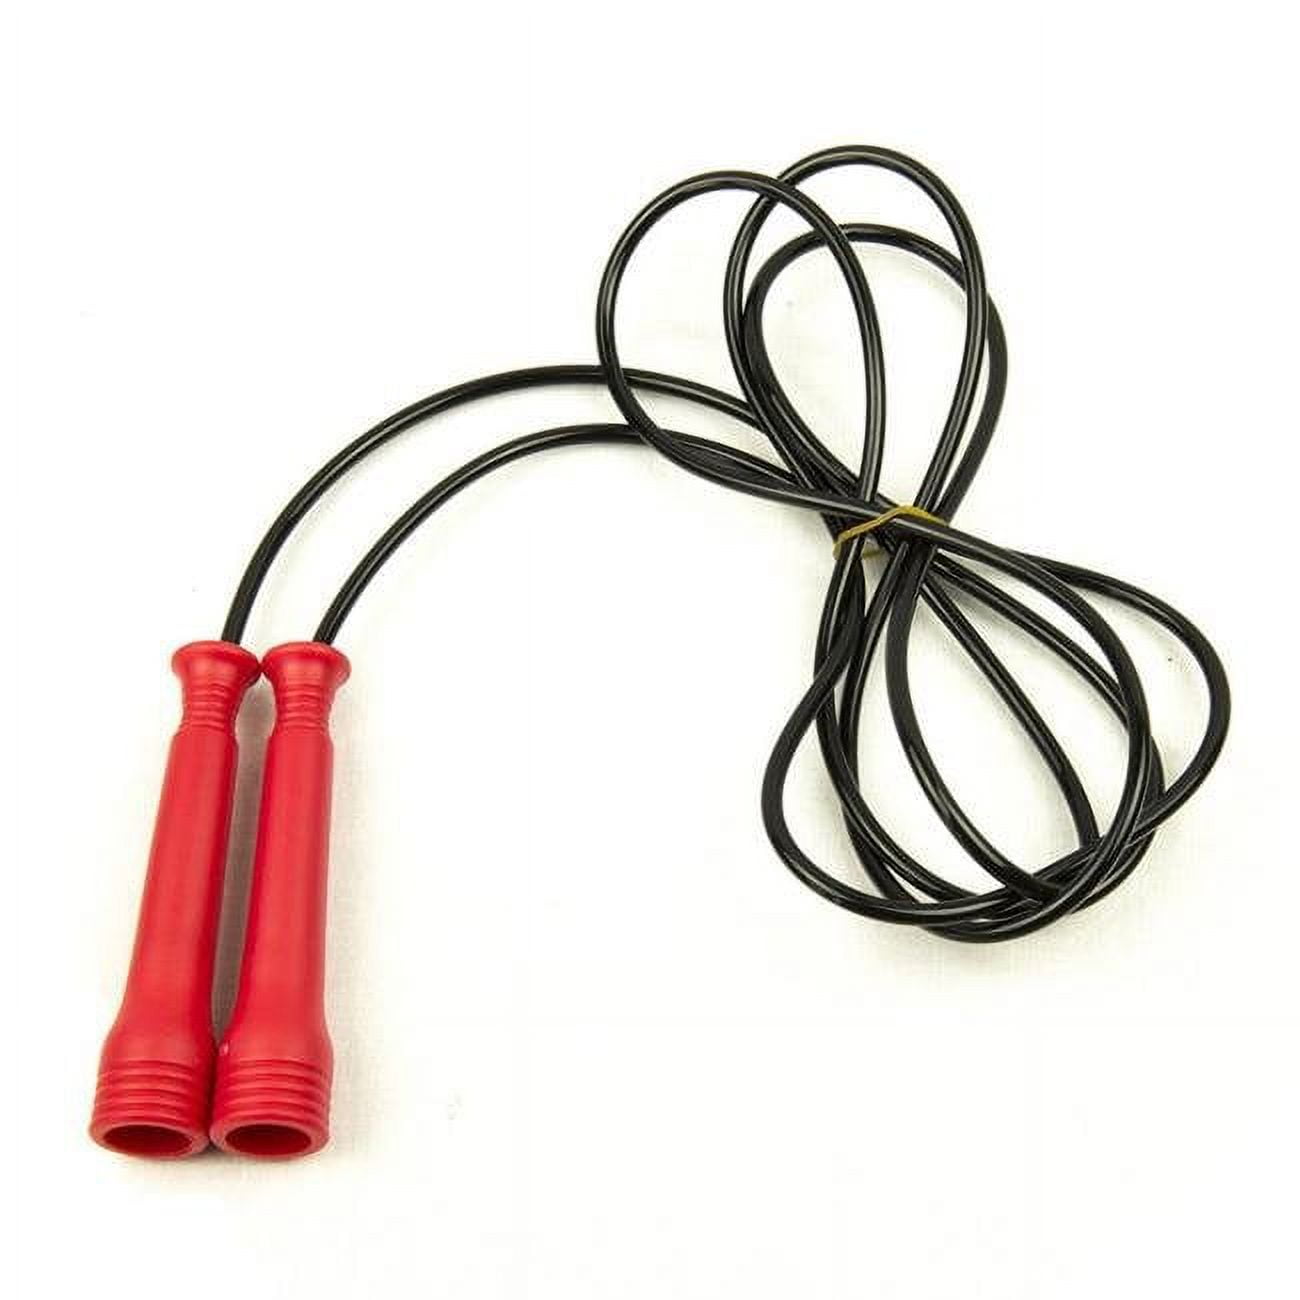 Picture of AeroMat 75015 8 ft. Adjustable Heavy Duty Speed Jump Rope, Red